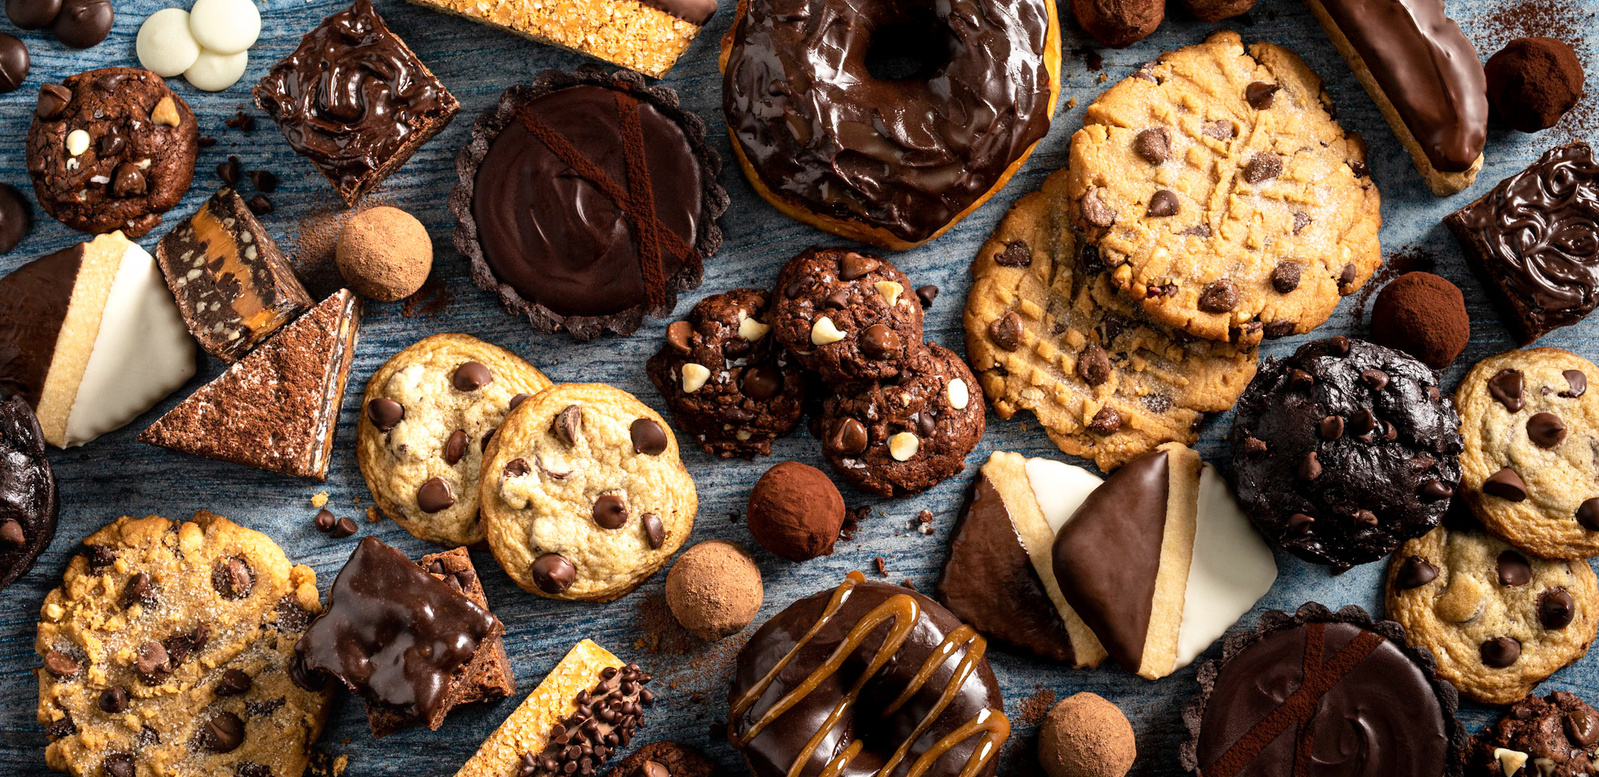 Overhead flat lay dessert images with cookies, doughnuts, brownies, and other sweets made with Ghirardelli chocolate chips. Chocolate photographer shot with heavy shadows.